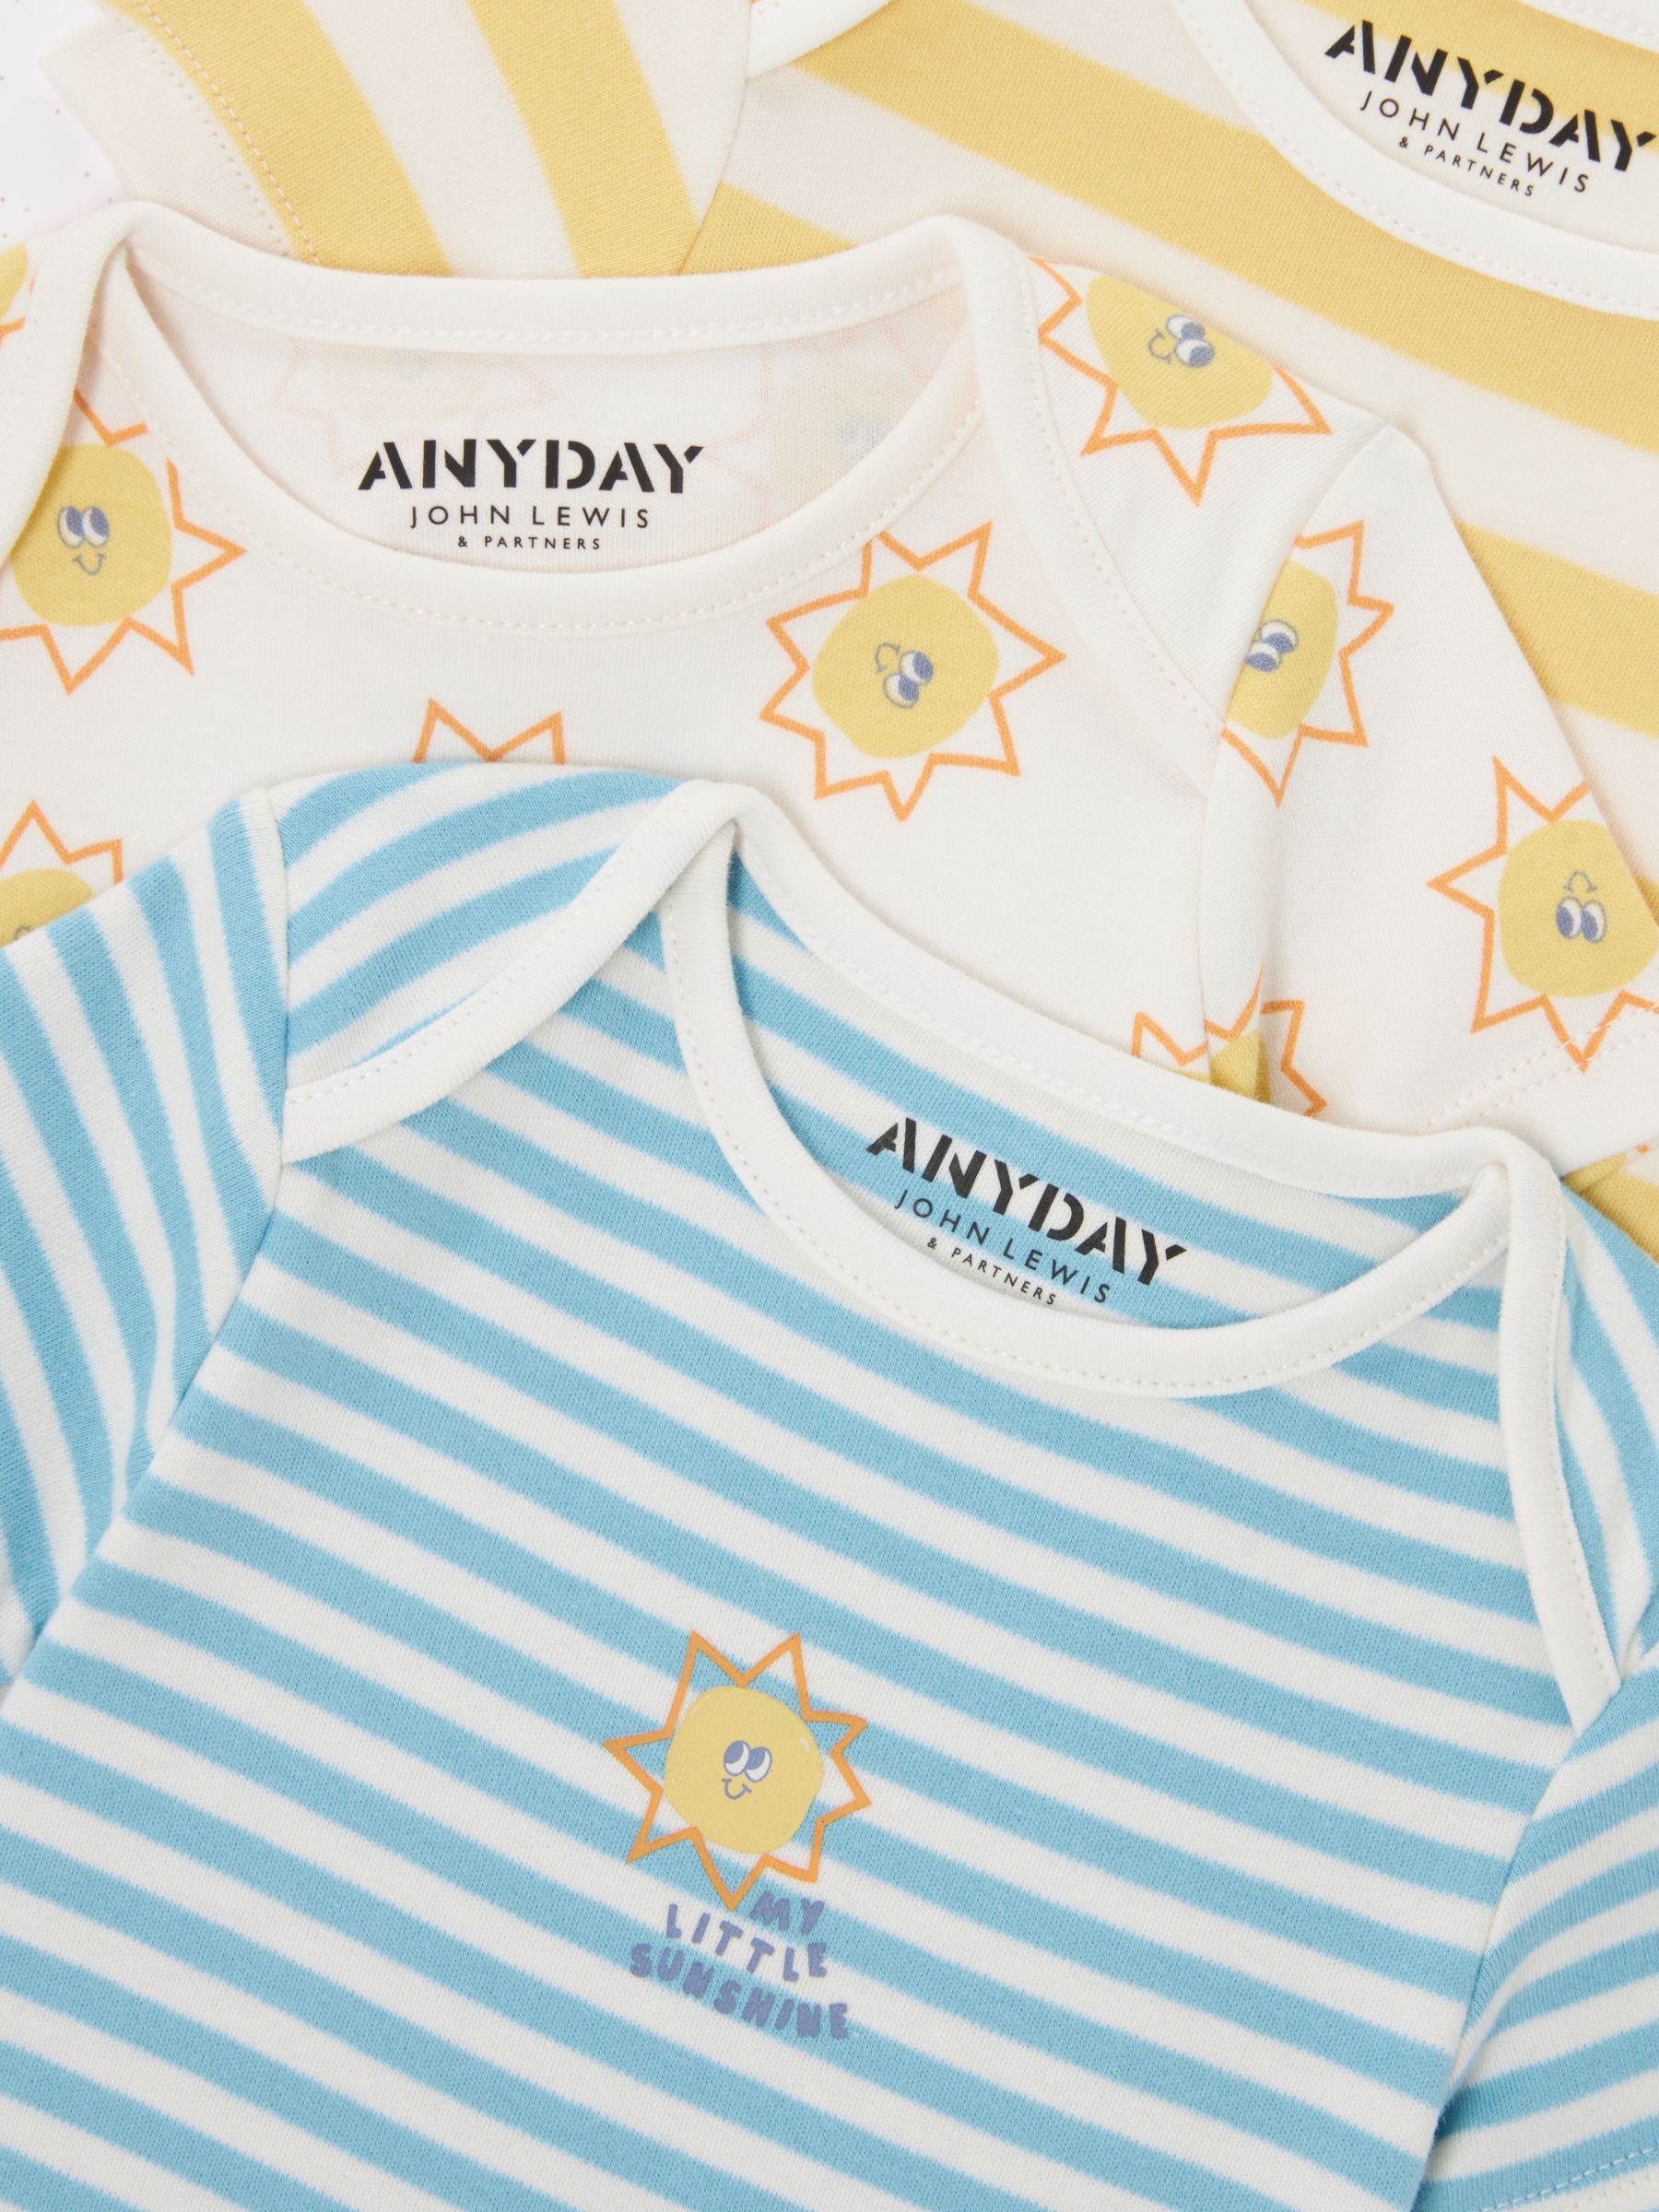 John Lewis ANYDAY Baby Printed Bodysuit, Pack of 3, Multi, 6-9 months